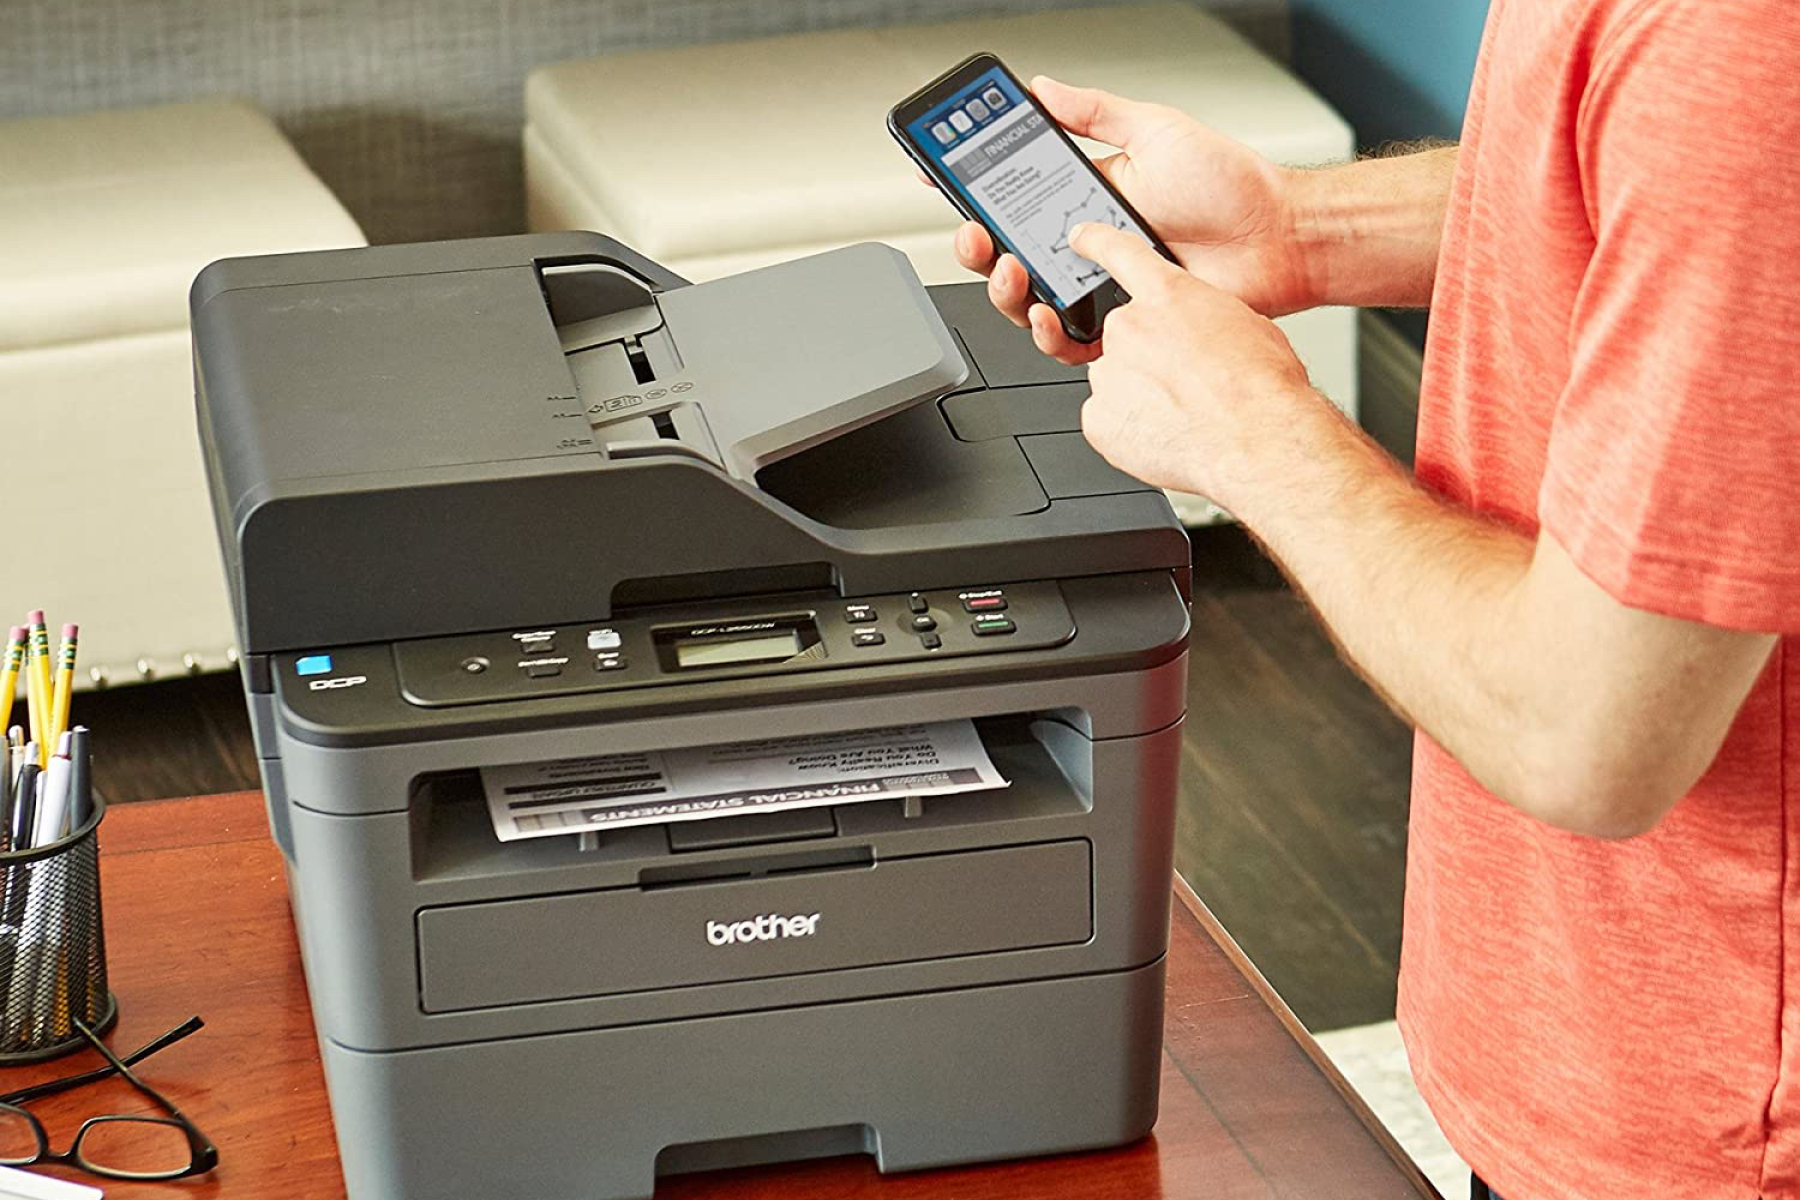 How To Resolve Brother Printer Not Connecting To WiFi